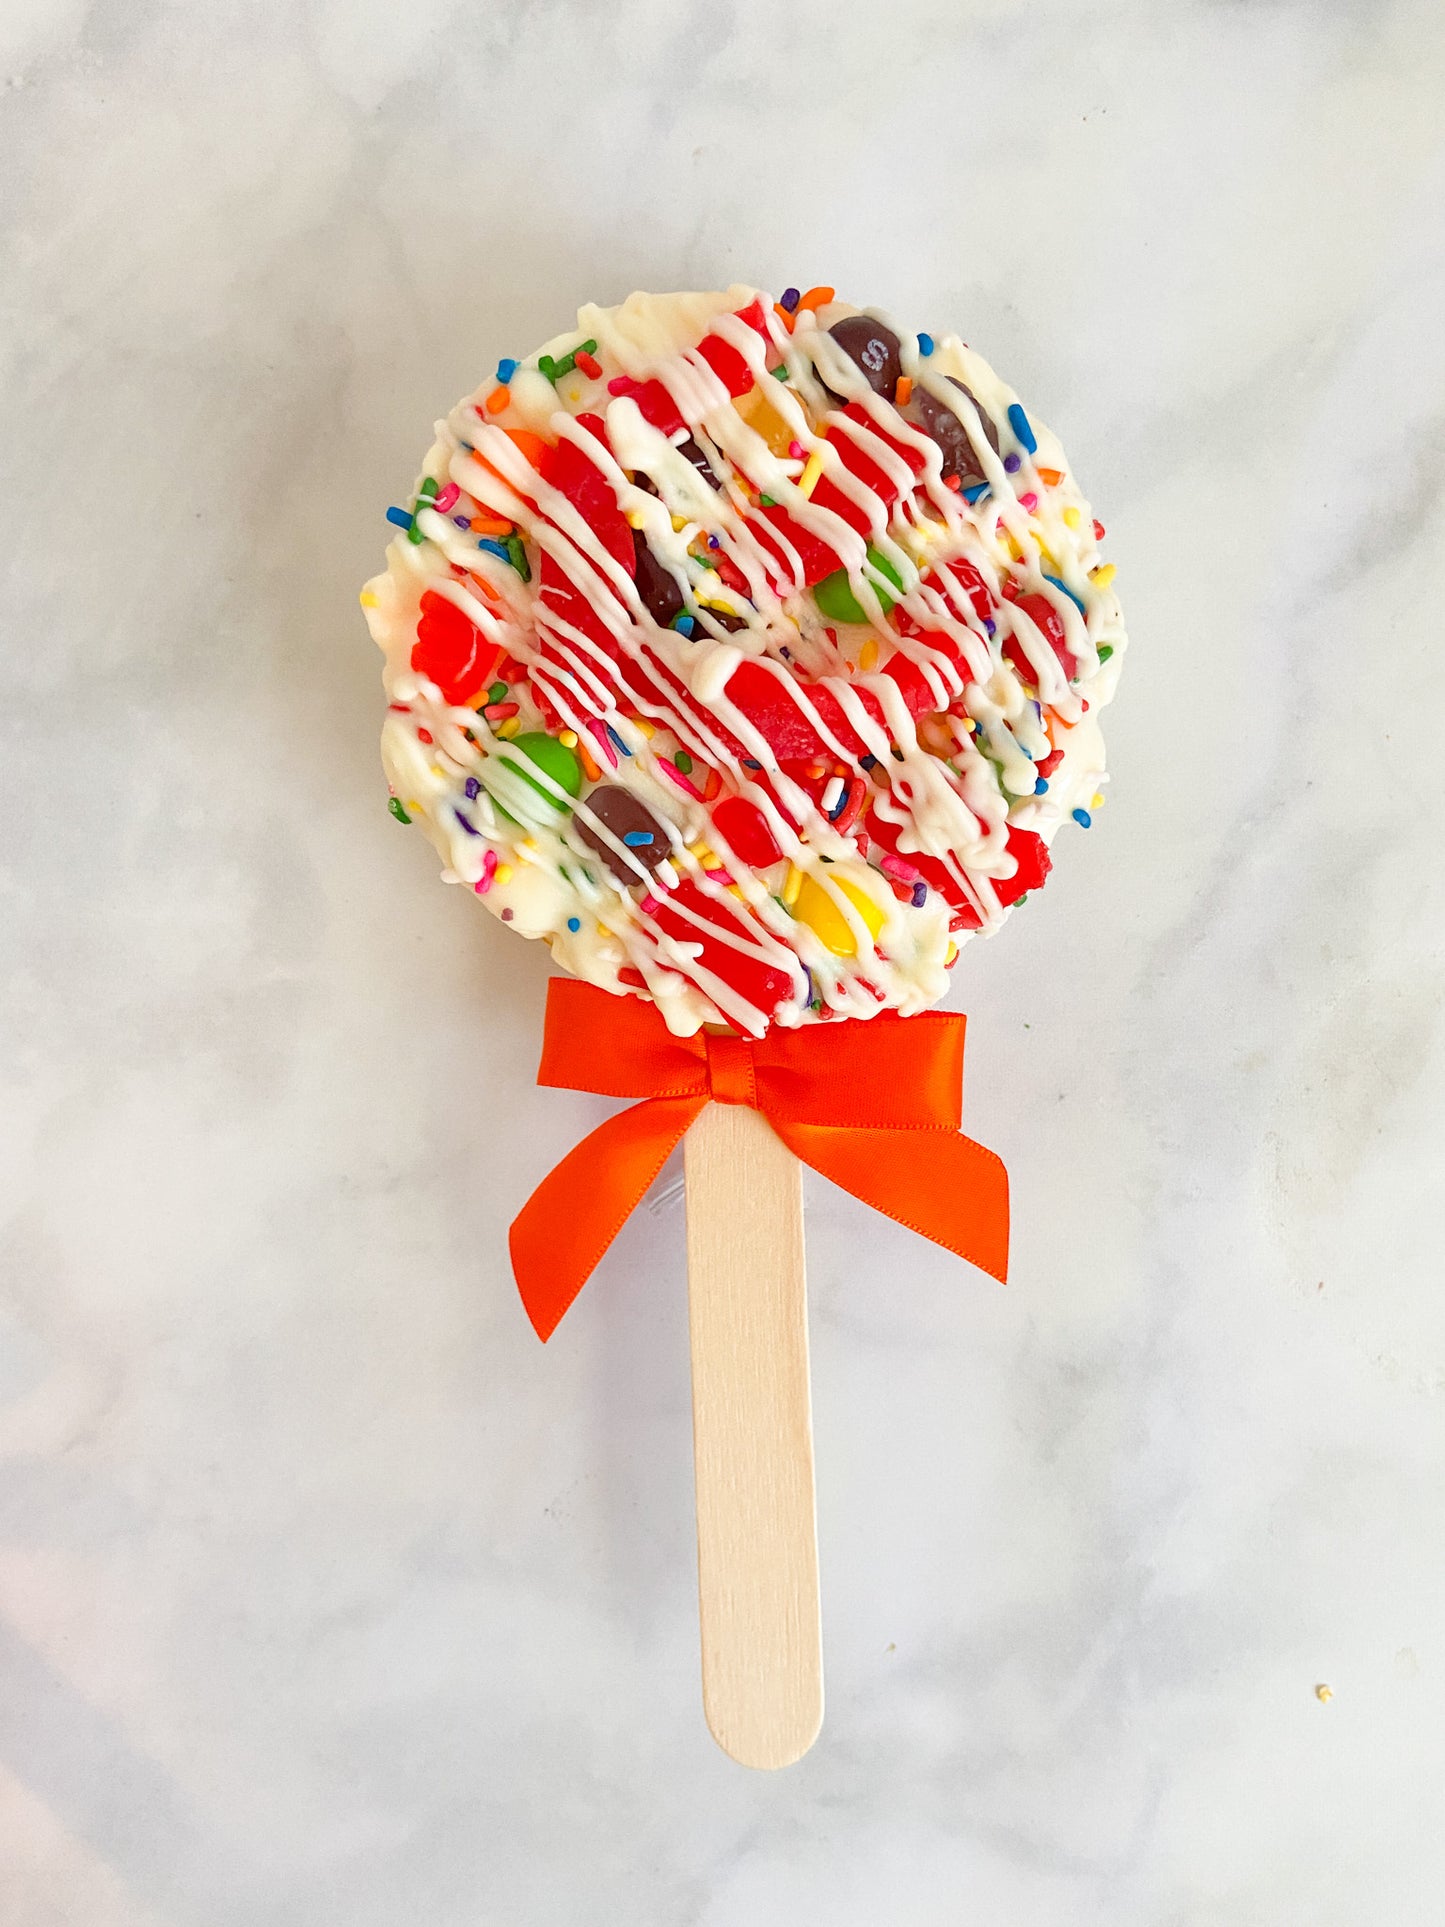 Chewy Candy Gourmet Popcorn Pops